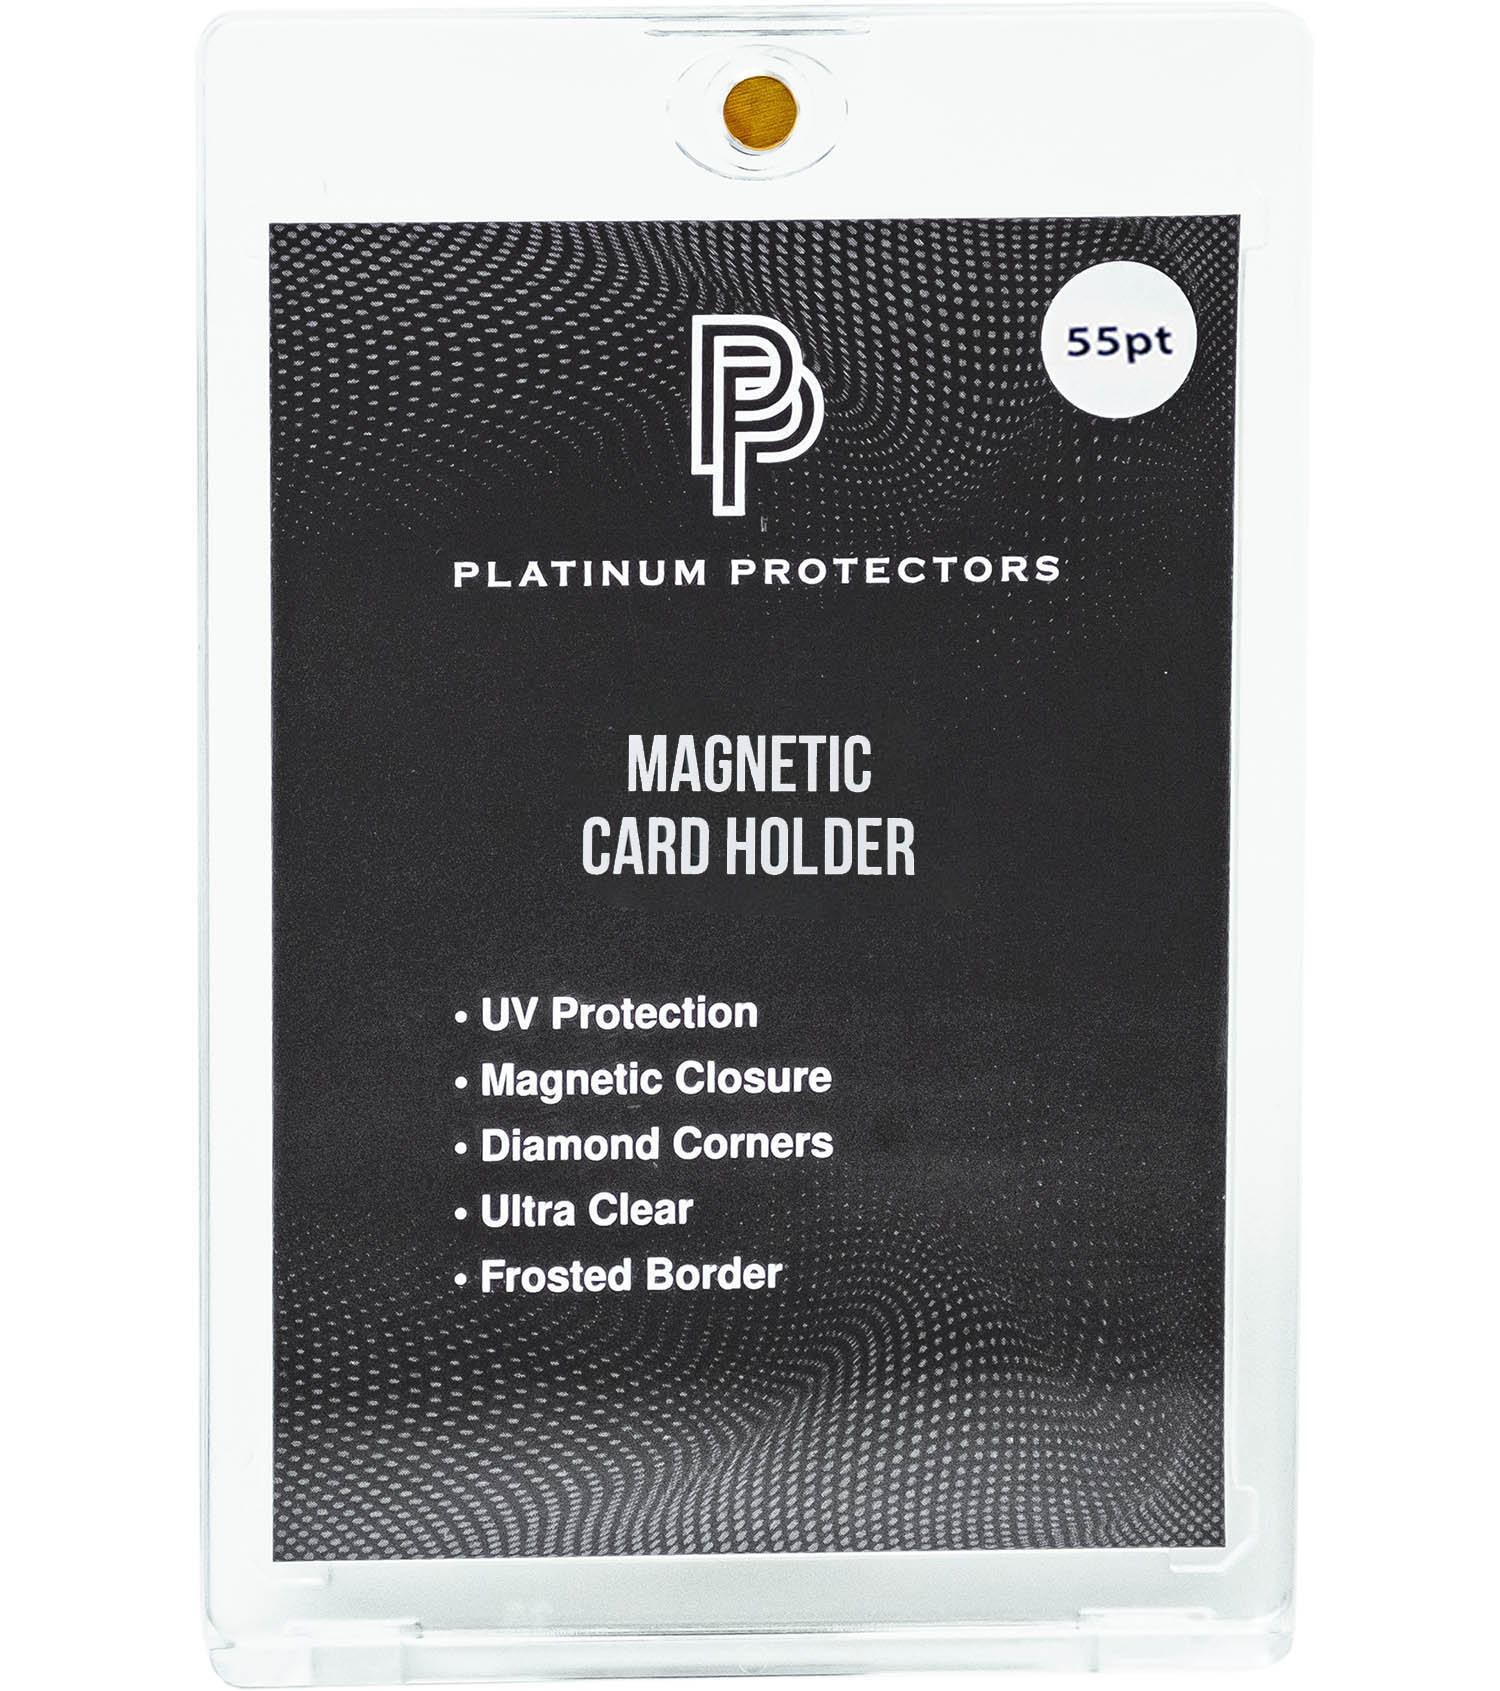 Platinum Protectors Magnetic Card Holders for Trading Cards - 55 pt